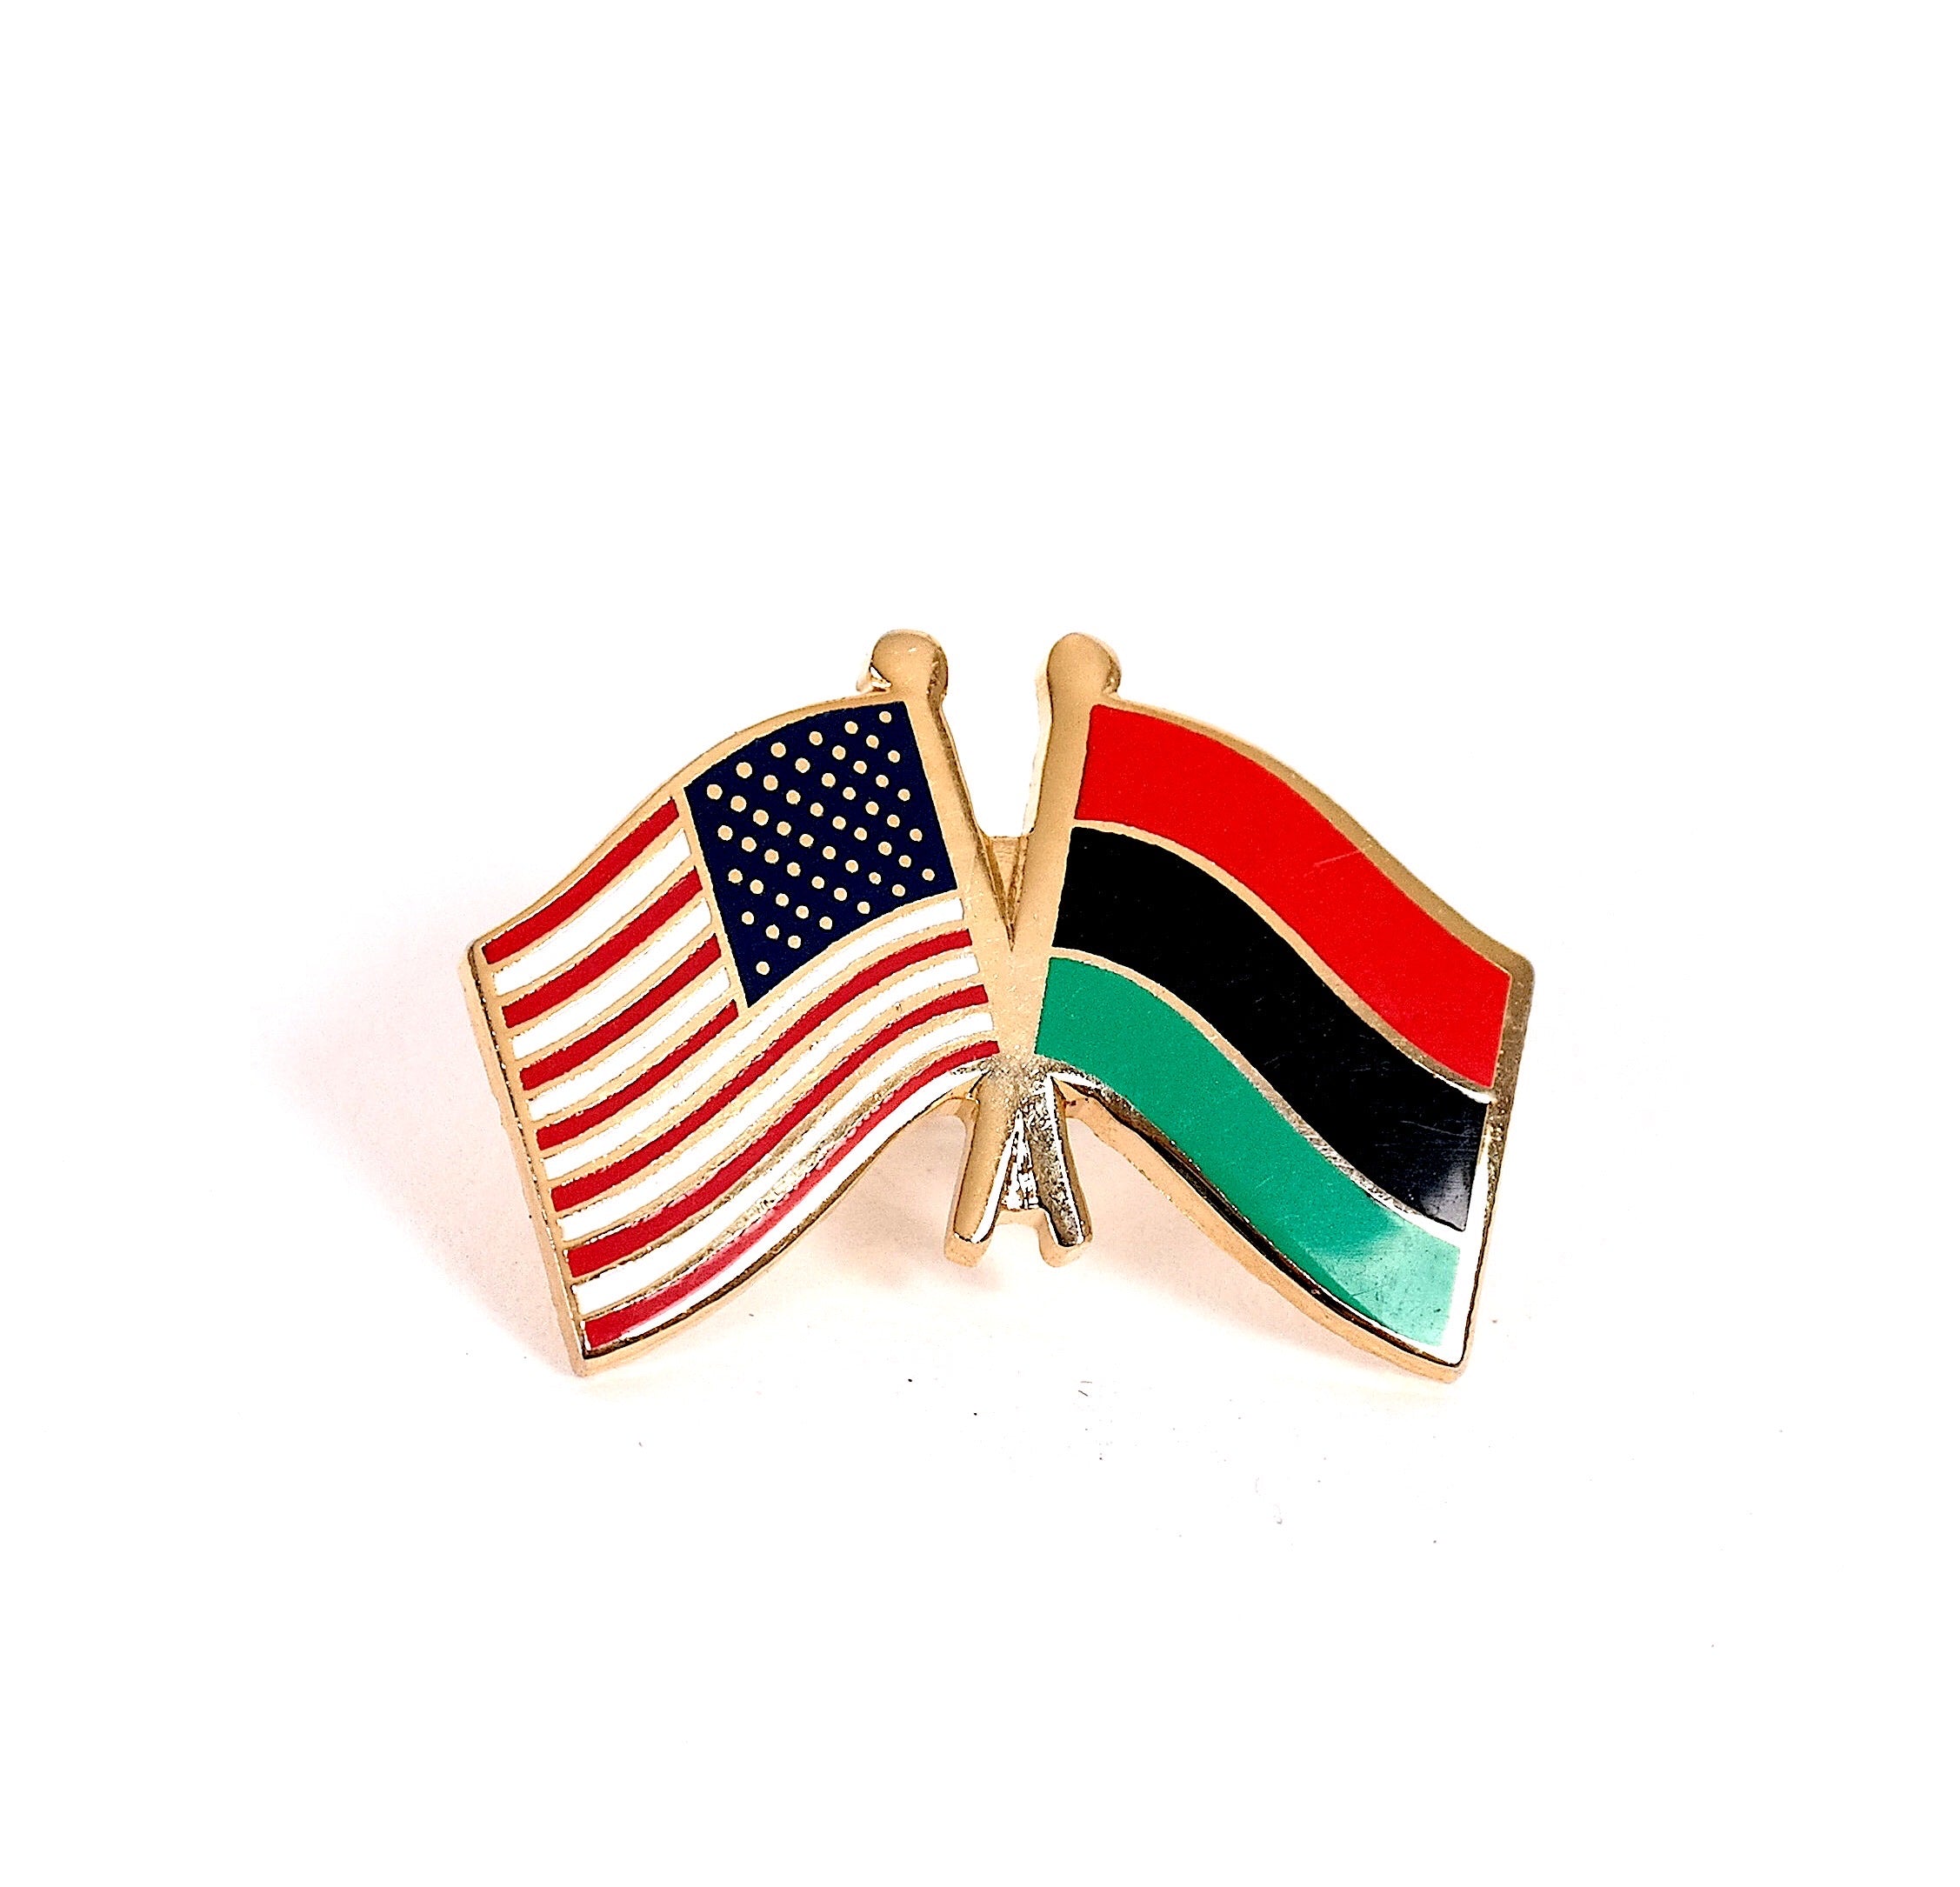 Afro-American & USA Friendship Flags Lapel Pin